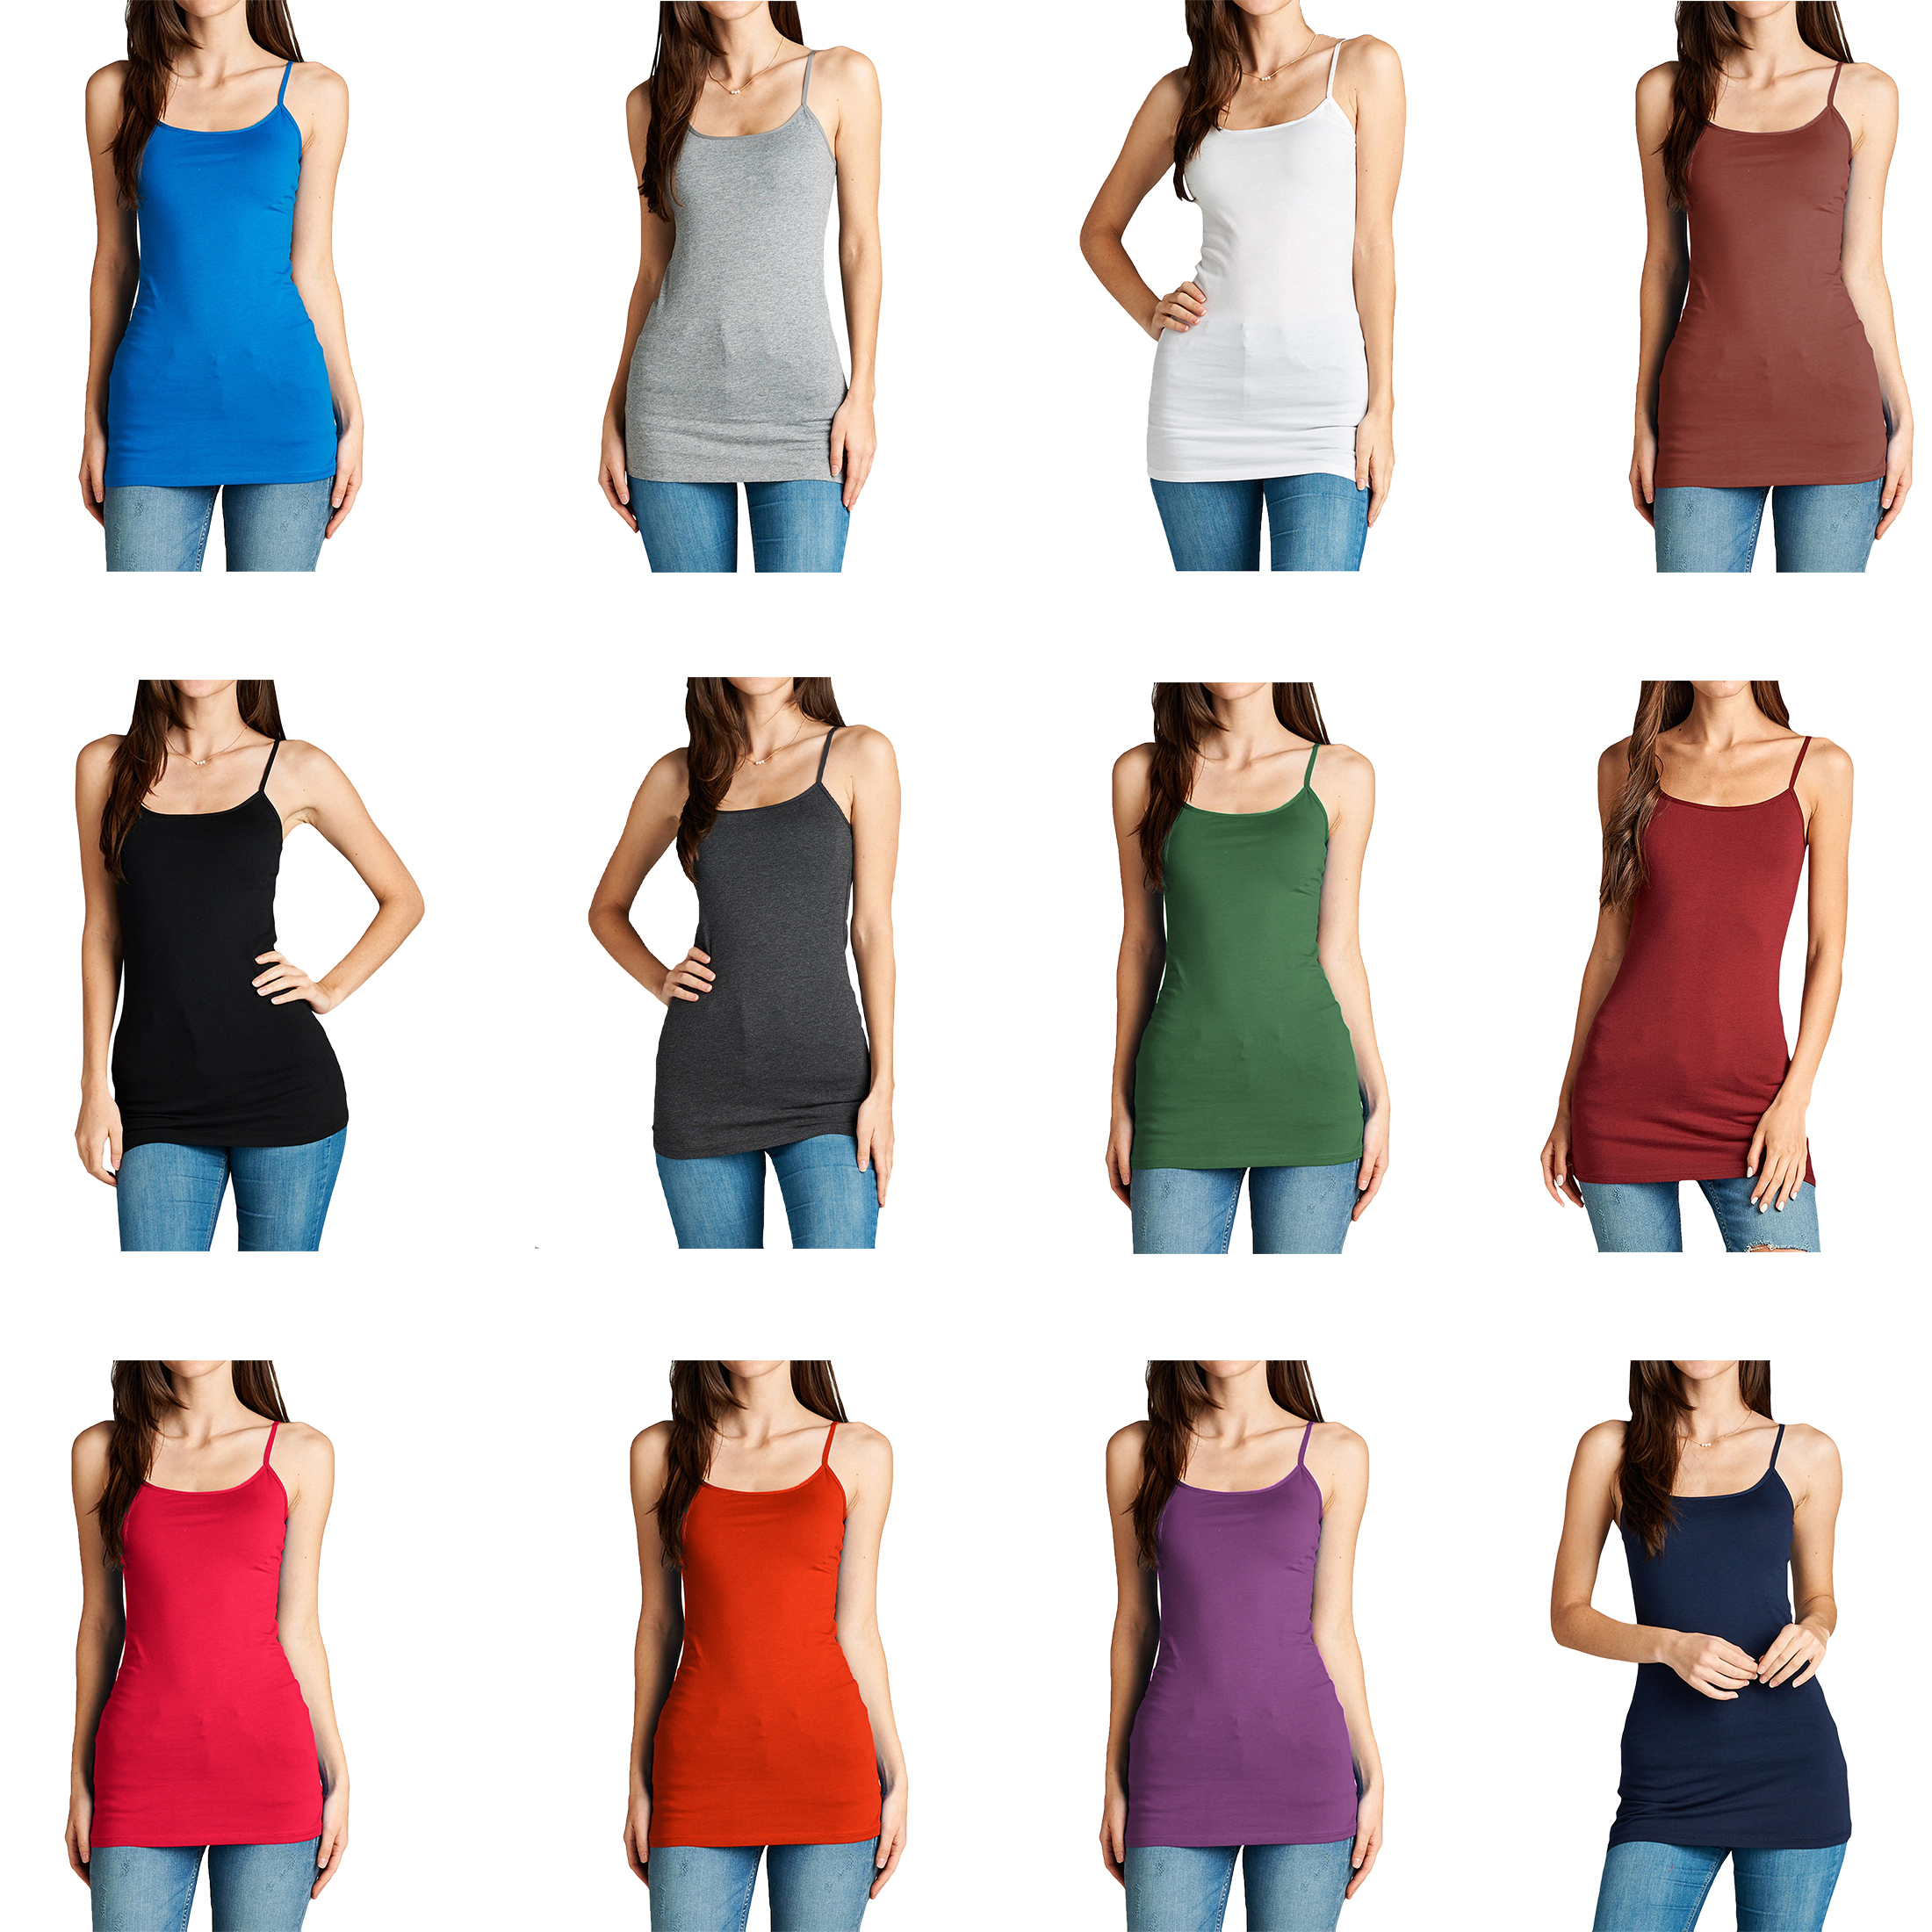 6-Pack Women's Sleeveless Athletic Tank Tops Soft Classic Relaxed-Fit Lightweight Ladies Tank Tees - S